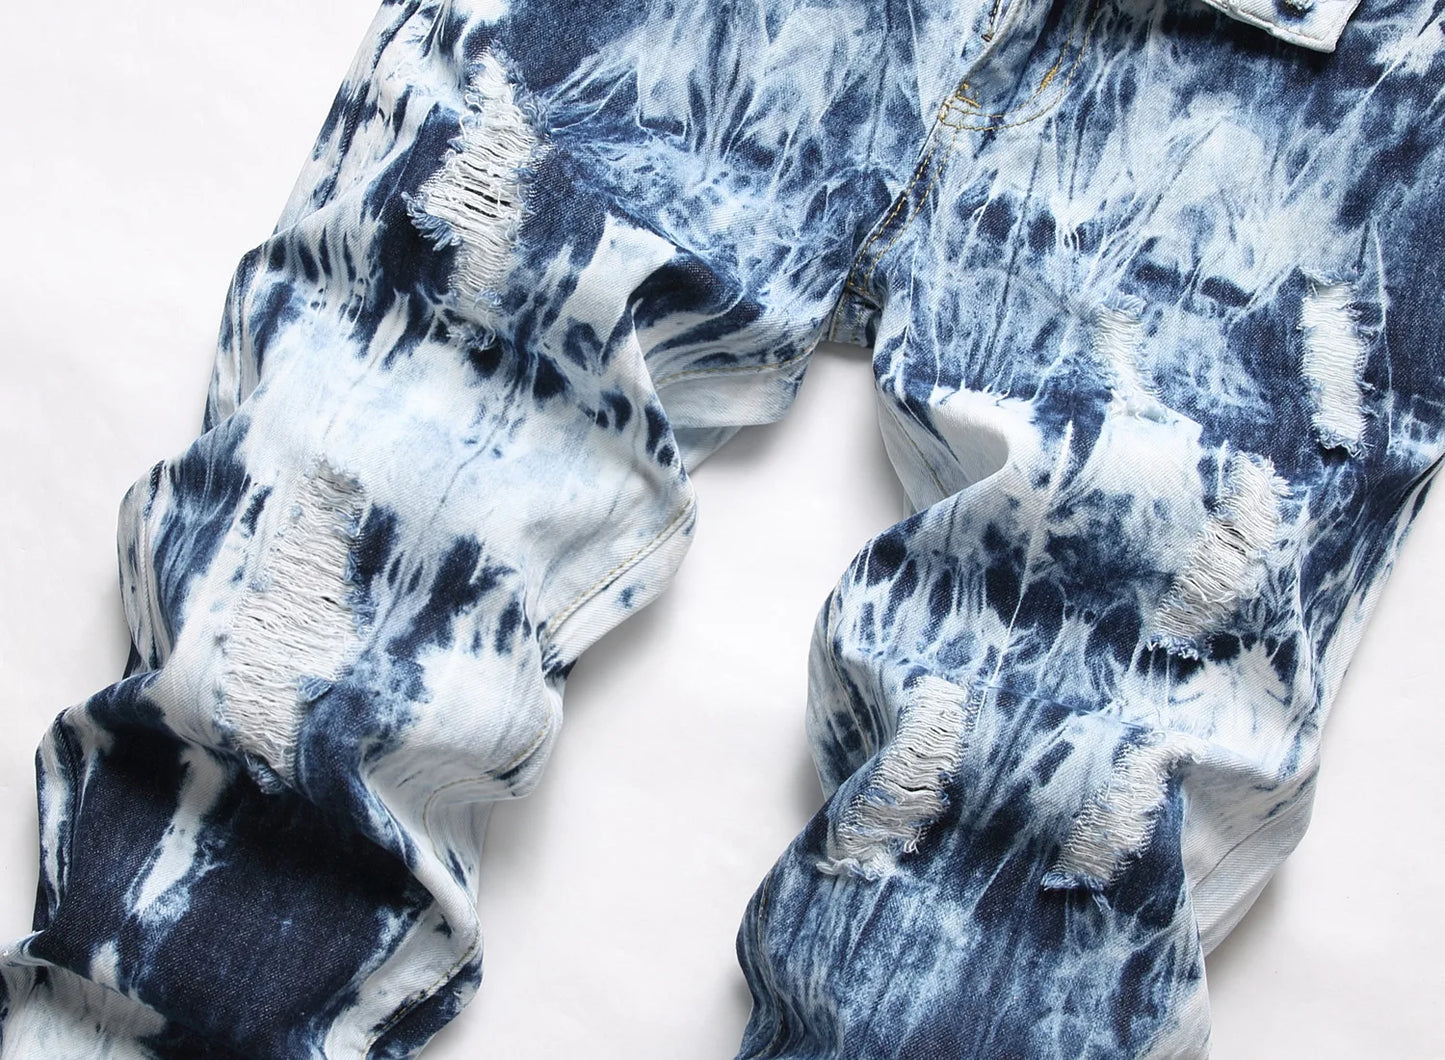 Men’s High Quality Tie-dyed Blue Jeans Slim-fit Ripped Jeans